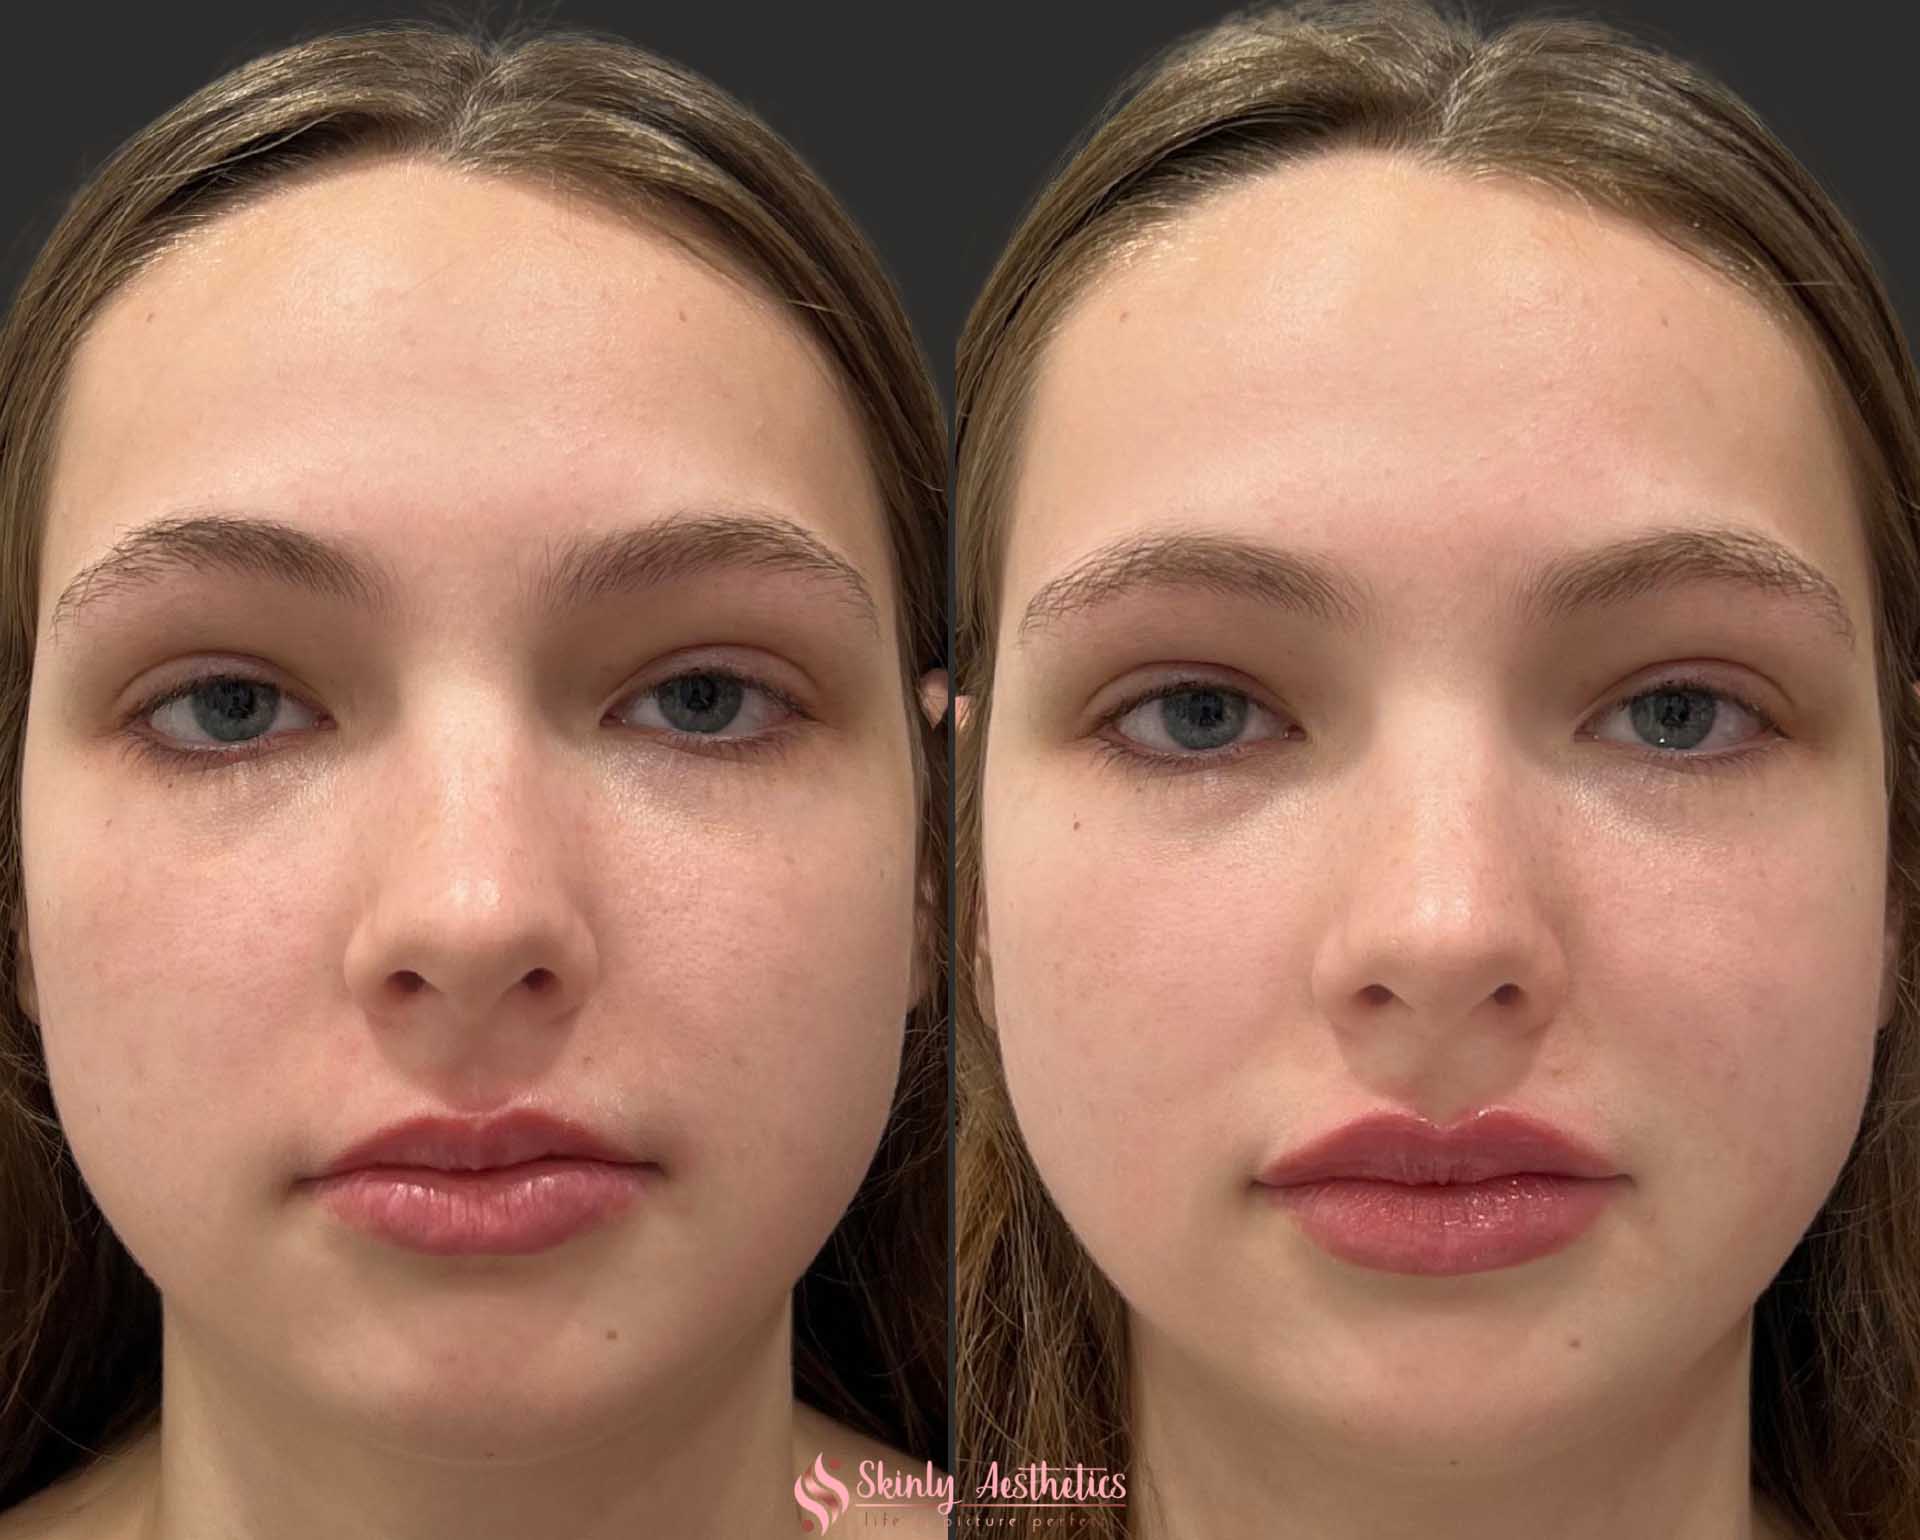 lip filler results after getting Juvederm Ultra injections